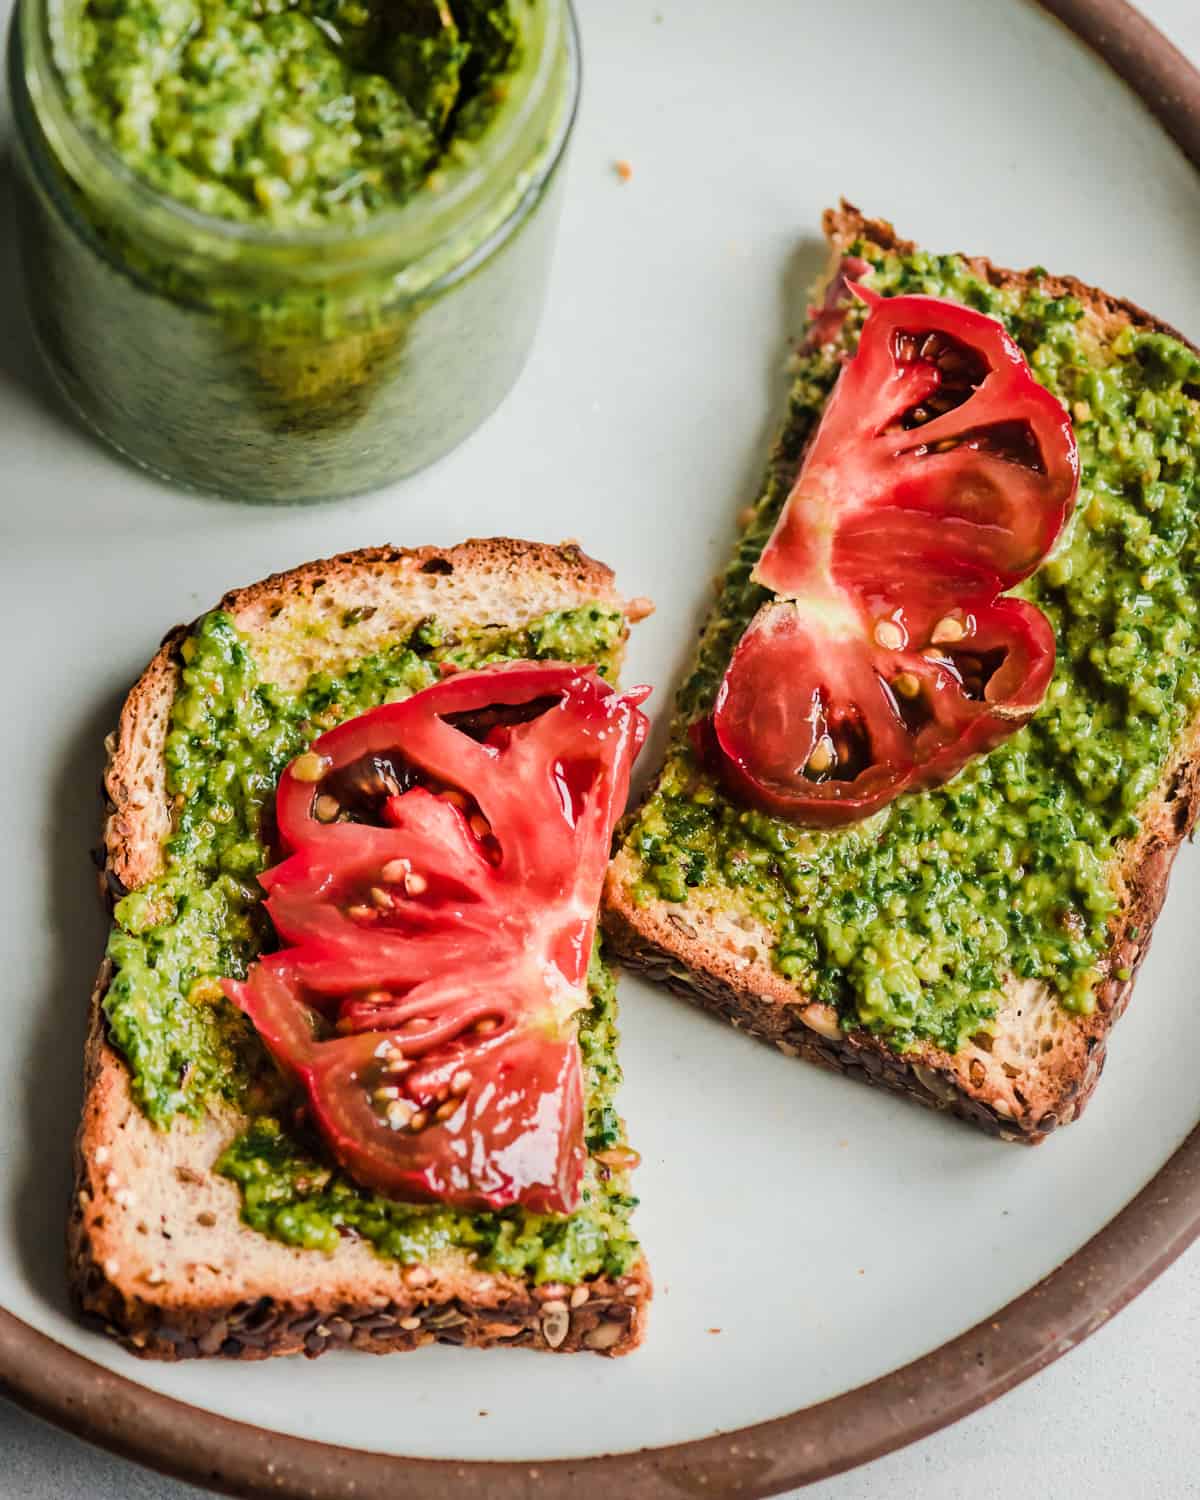 Vegan pesto and heirloom tomatoes on two halves of a piece of toast.